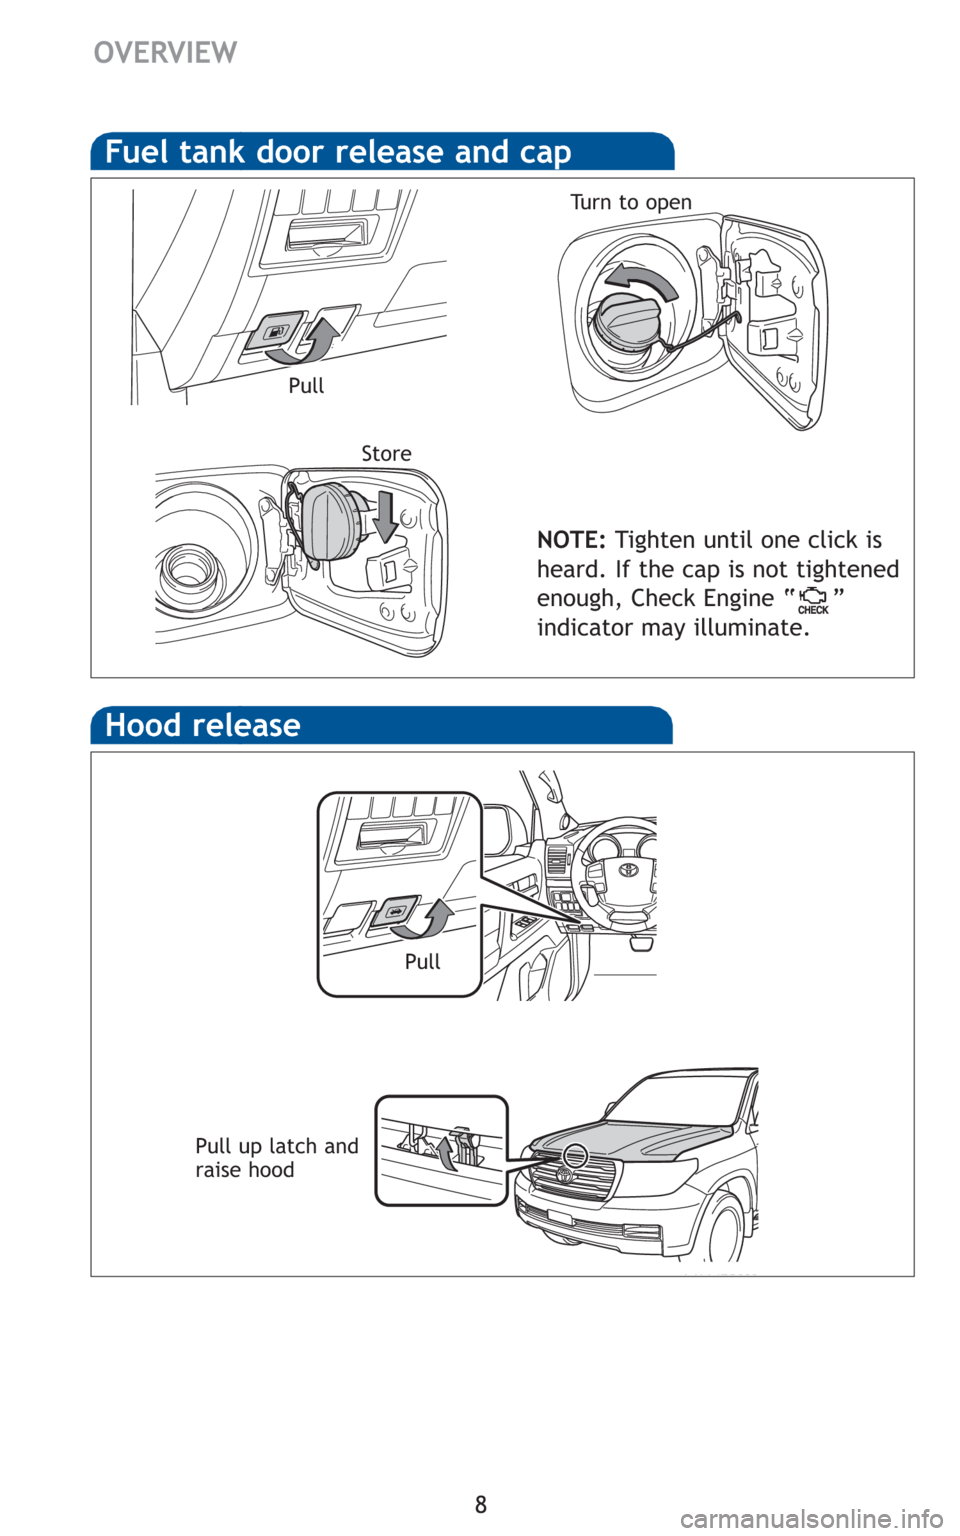 TOYOTA LAND CRUISER 2011 J200 Quick Reference Guide 8
Hood release
Pull up latch and
raise hood
Fuel tank door release and cap
NOTE:Tighten until one click is
heard. If the cap is not tightened
enough, Check Engine “ ”
indicator may illuminate.
Pul